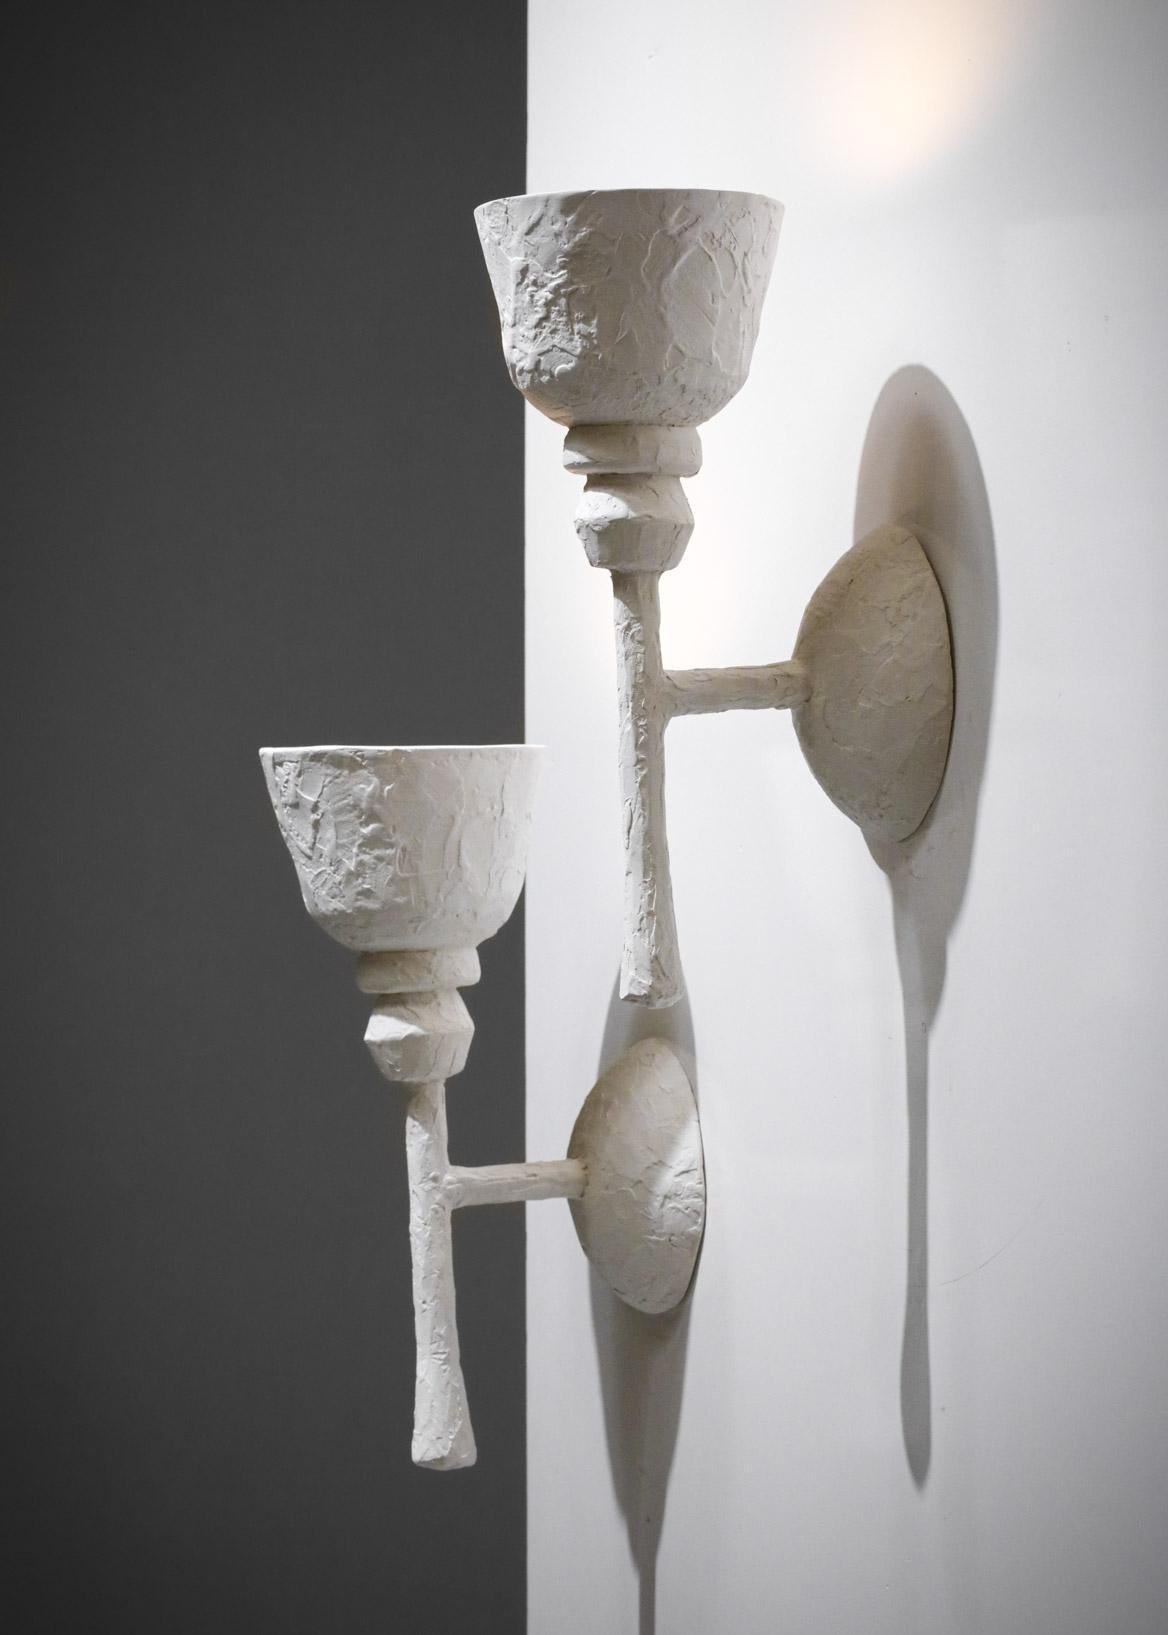 Pair of modern French sconces in the style of Jean Michel Franck or Diego Giacometti. Structure and lampshade in white textured plaster. Sober and pure design, quite sculptural. Recommended LED bulbs type E27.